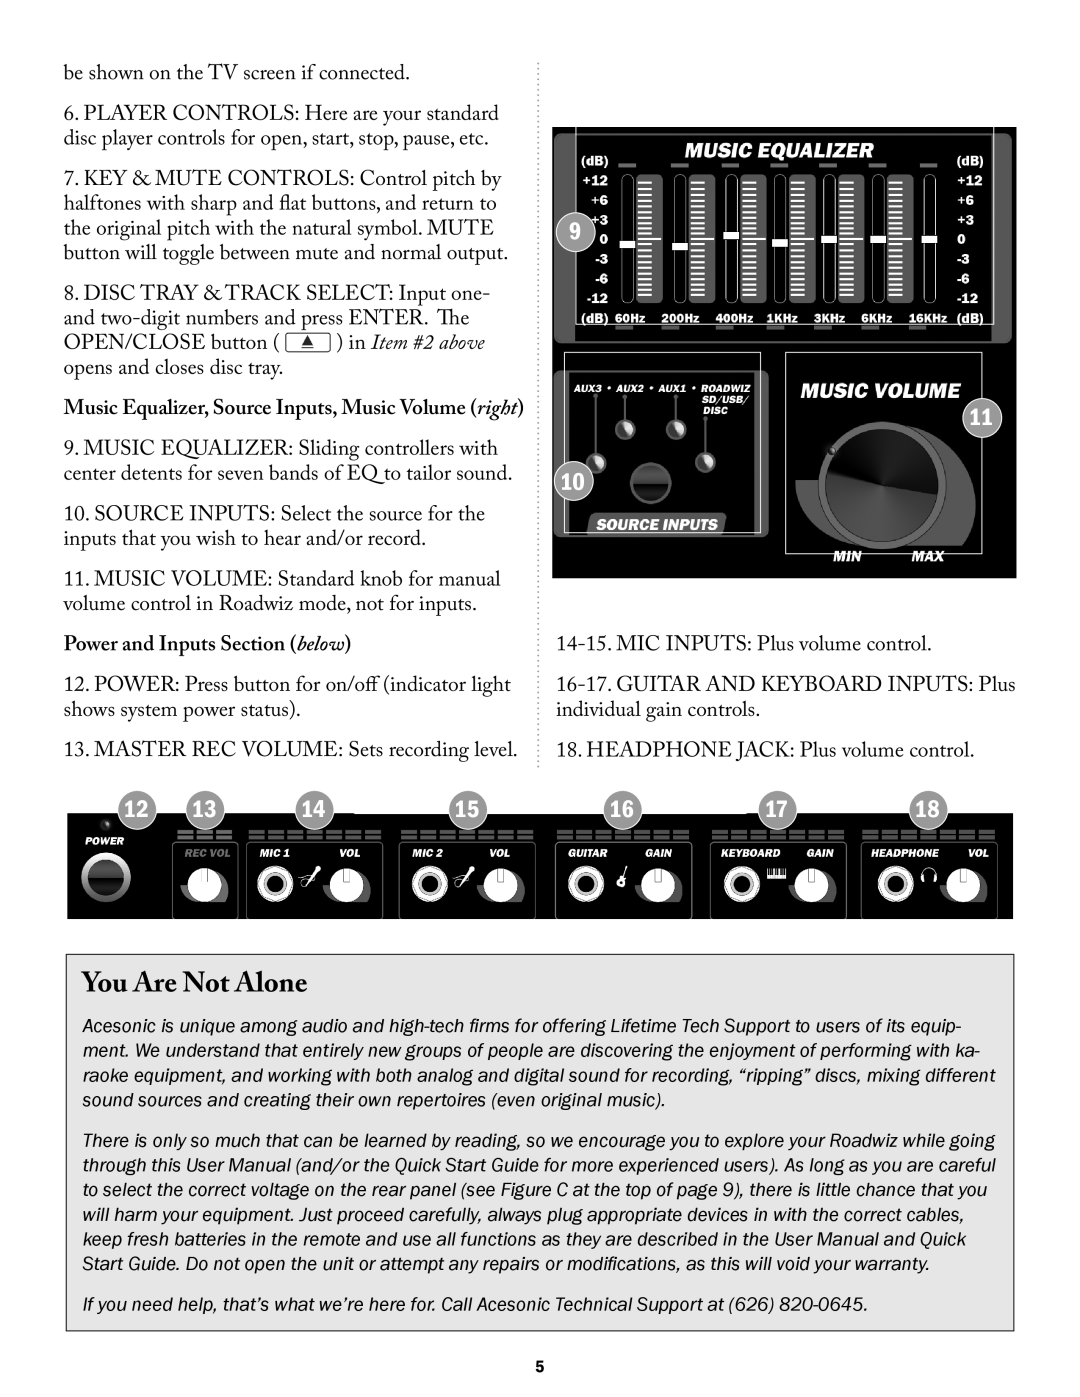 Acesonic PK-1290 user manual Power and Inputs Section below, You Are Not Alone 